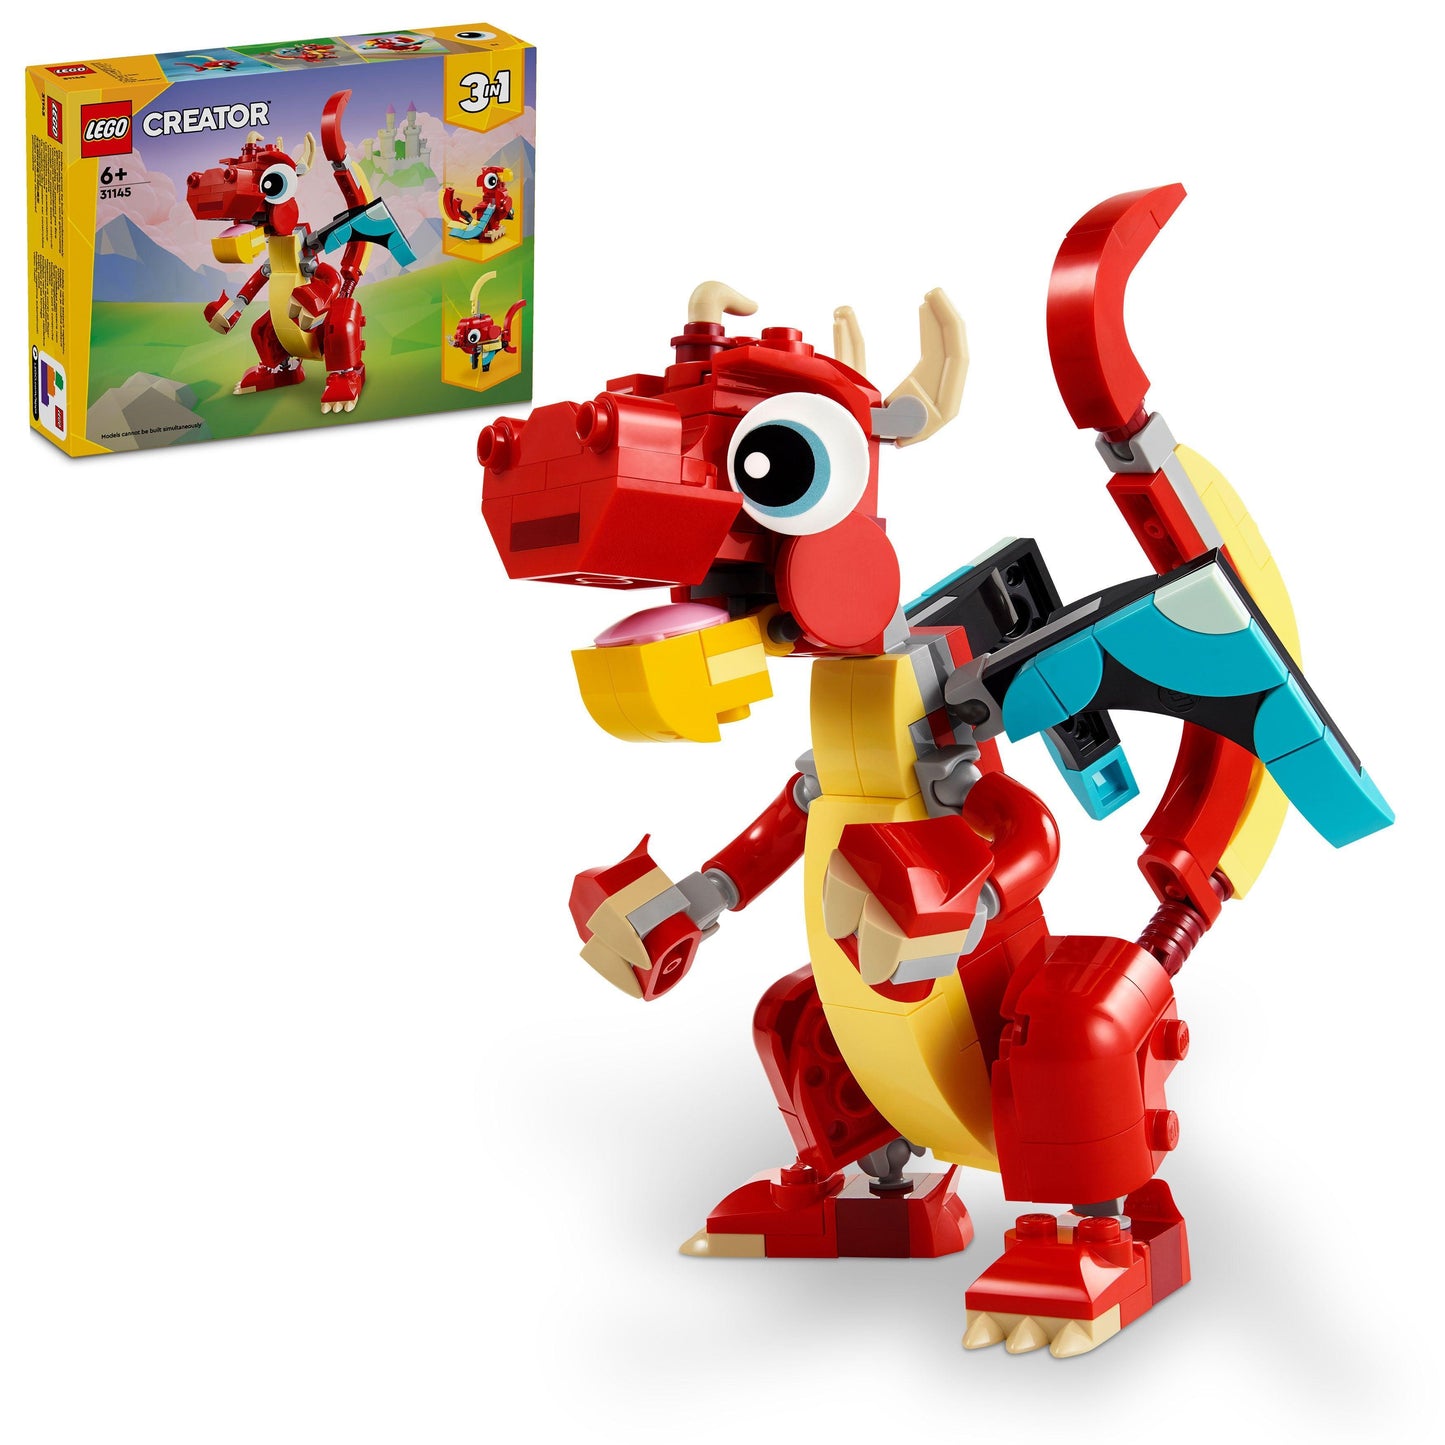 LEGO Rode Draak 31145 Creator 3 in 1 | 2TTOYS ✓ Official shop<br>